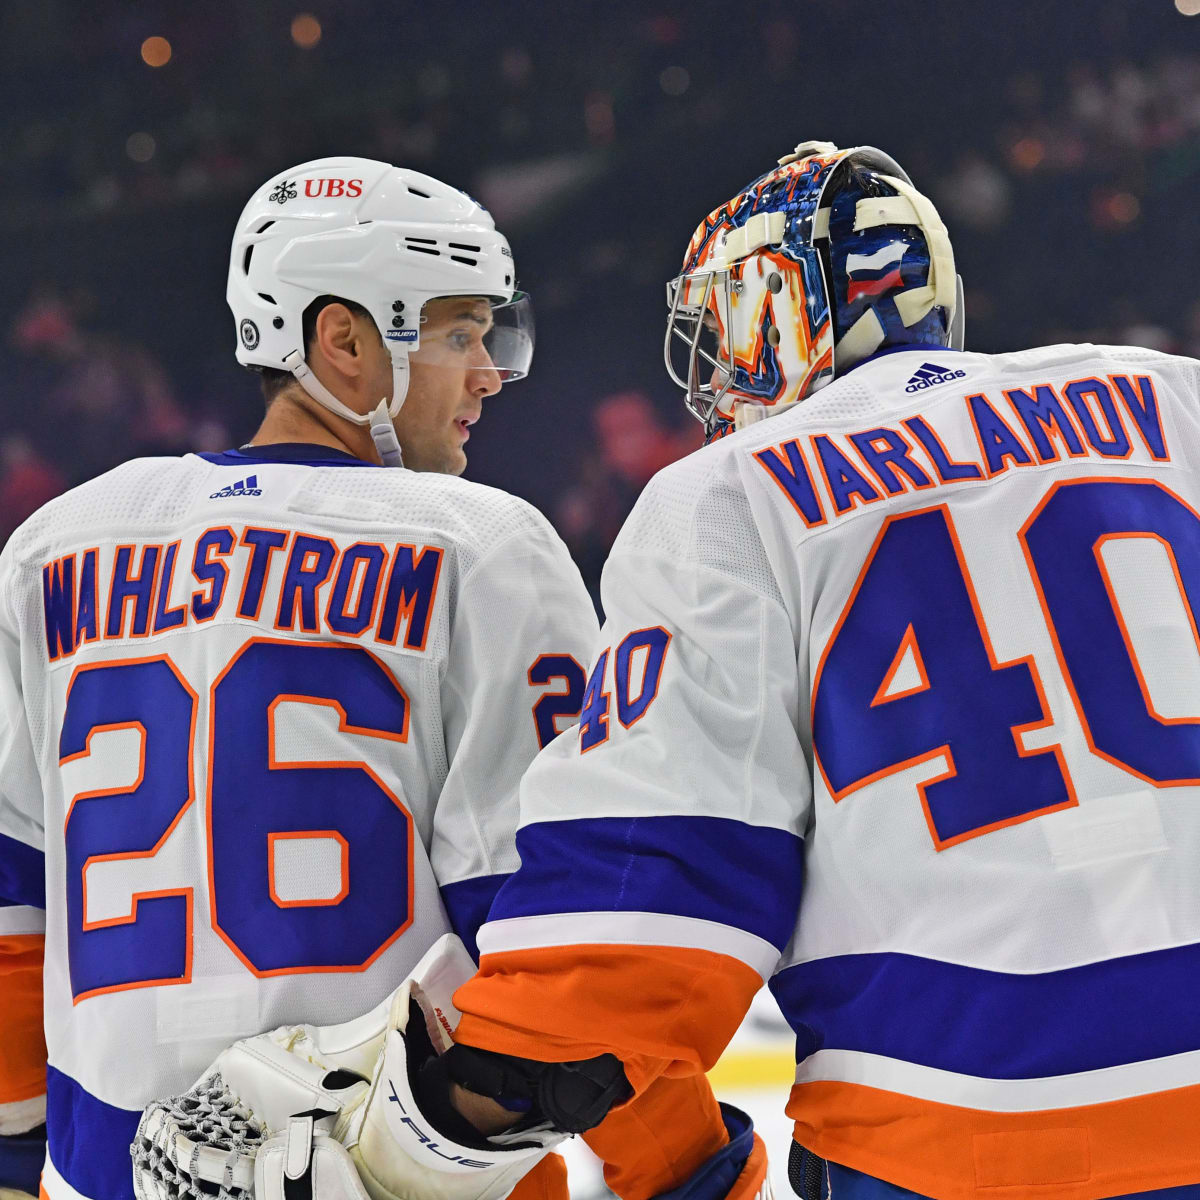 What Will Home Games Look Like for New York Islanders Next Season?